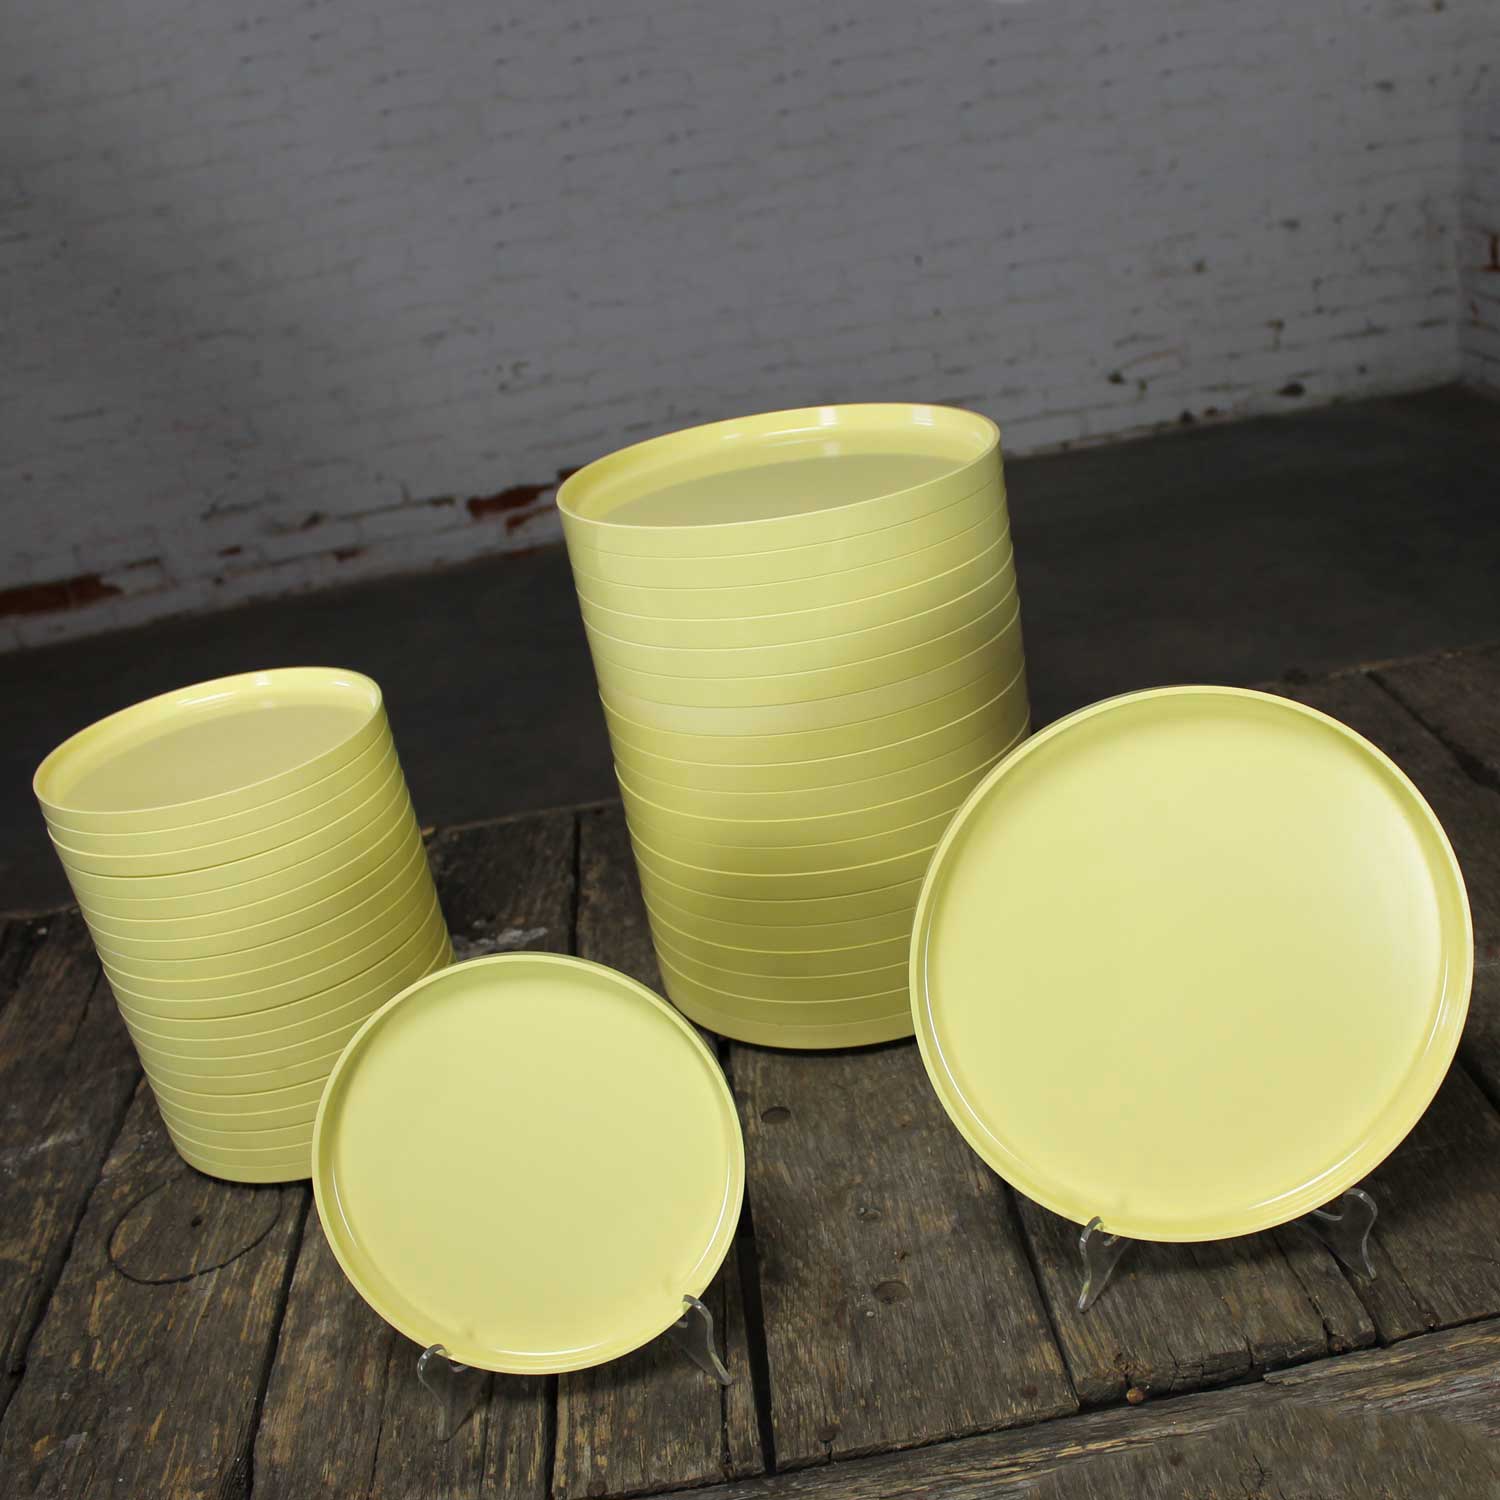 Massimo Vignelli for Heller Dinnerware 20 Large Plates and 20 Small Plates Light Yellow